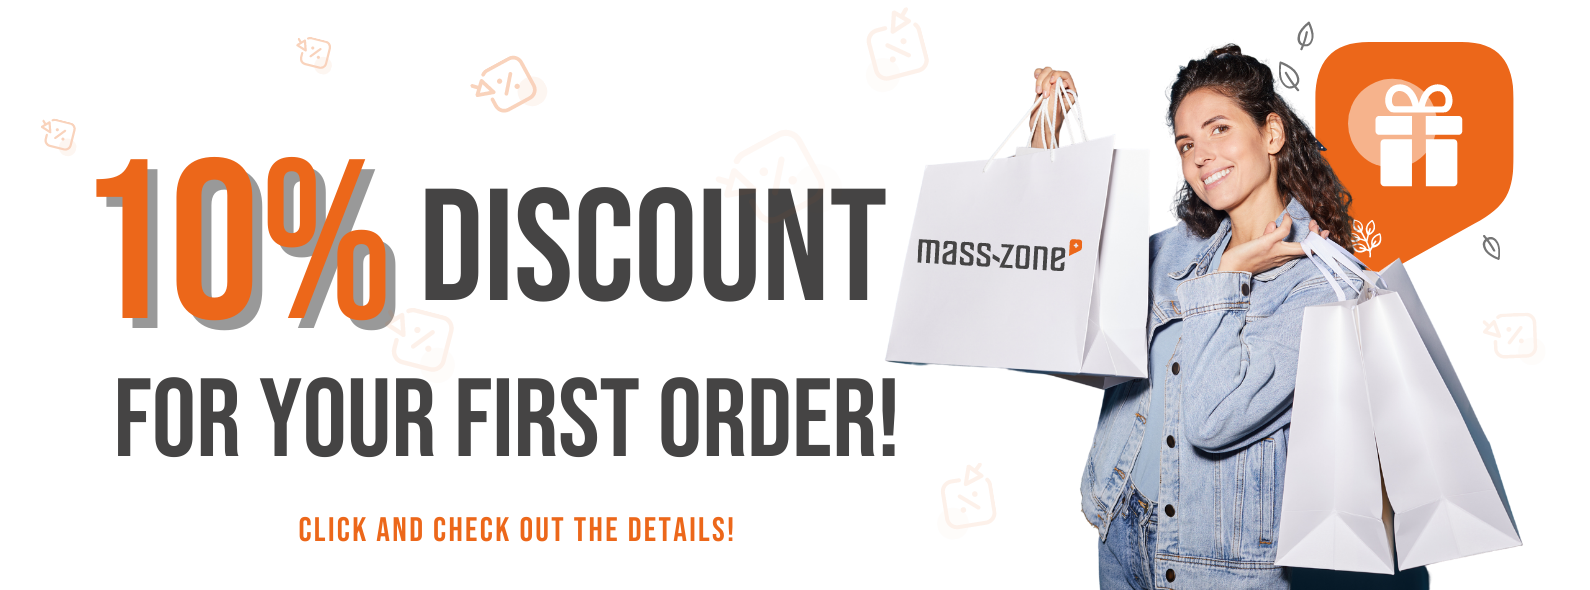 10% DISCOUNT ON YOUR FIRST ORDER